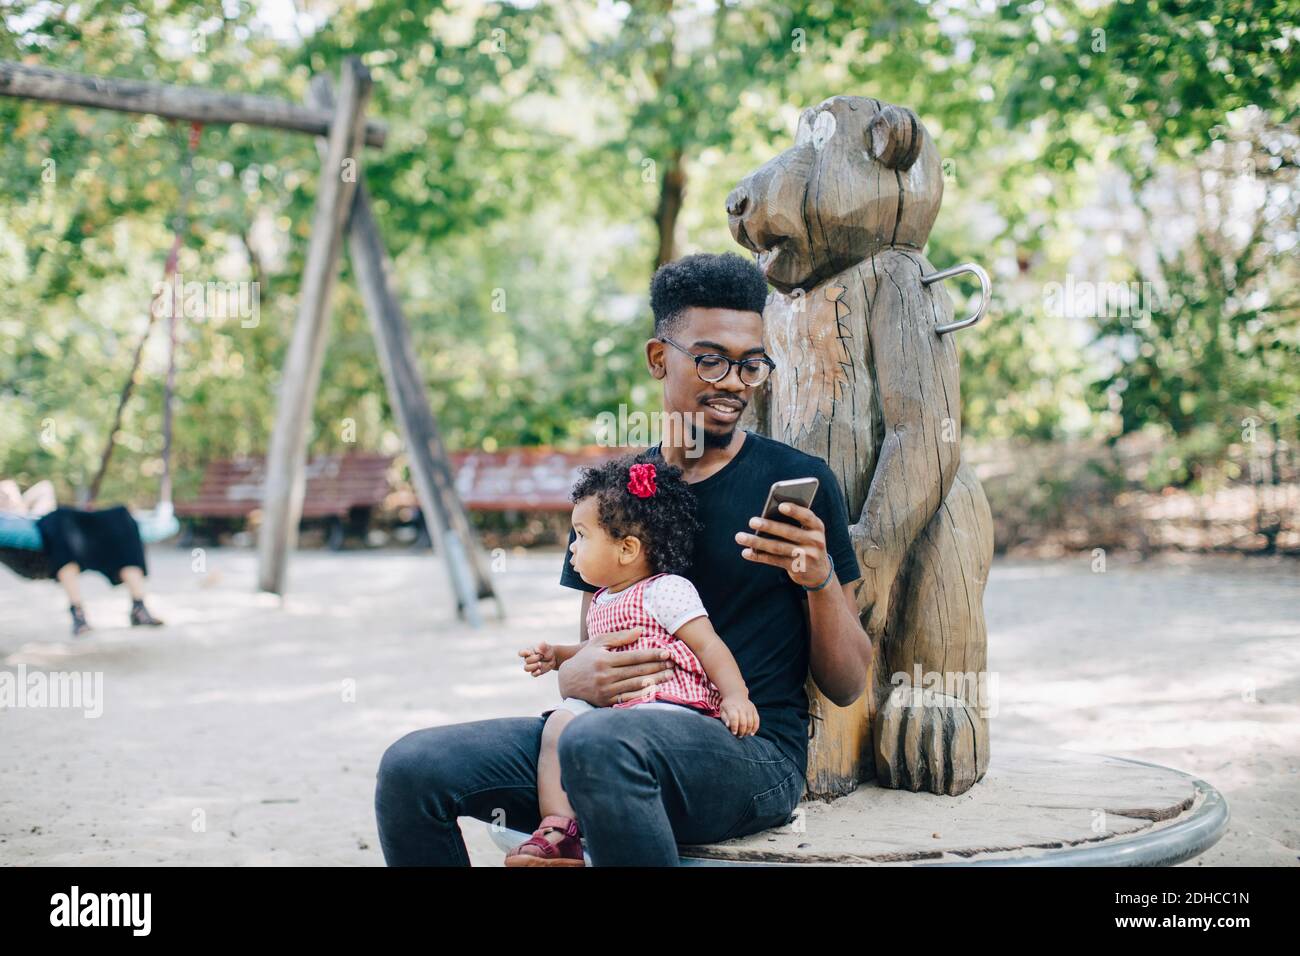 Father using mobile phone while sitting with daughter on outdoor play equipment Stock Photo